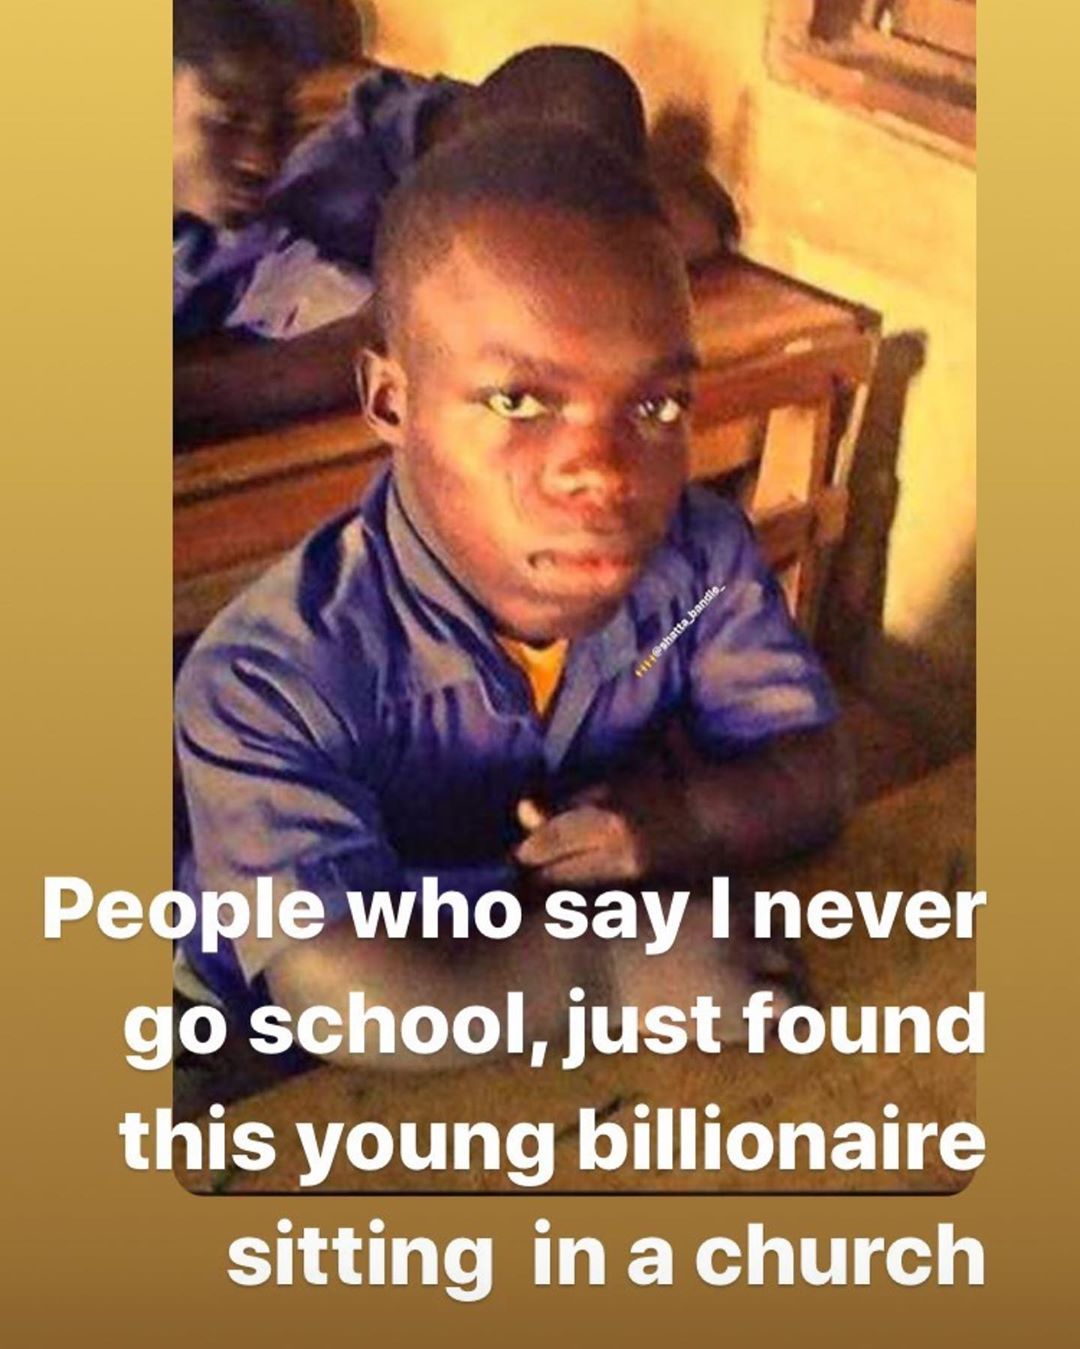 This is for people who call me illiterate - Shatta Bandle shares throwback photo of himself in secondary school